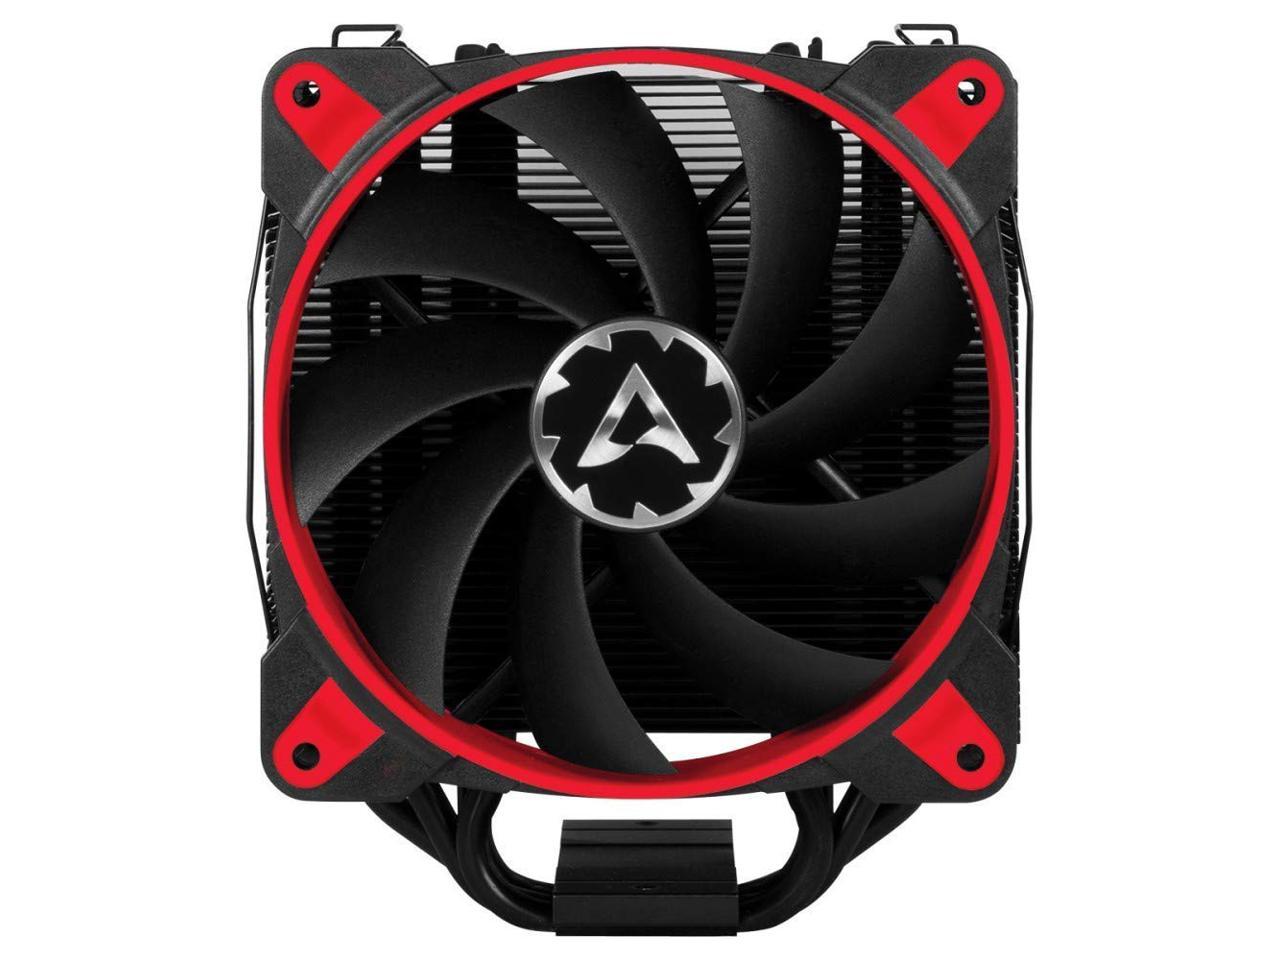 Red Wide Range of Regulation 200 to 2100 RPM Includes 2 Low Noise PWM 120 mm Fans ARCTIC Freezer 34 eSports DUO Silent 3 Phase Motor Tower CPU Cooler with Push-Pull Configuration 